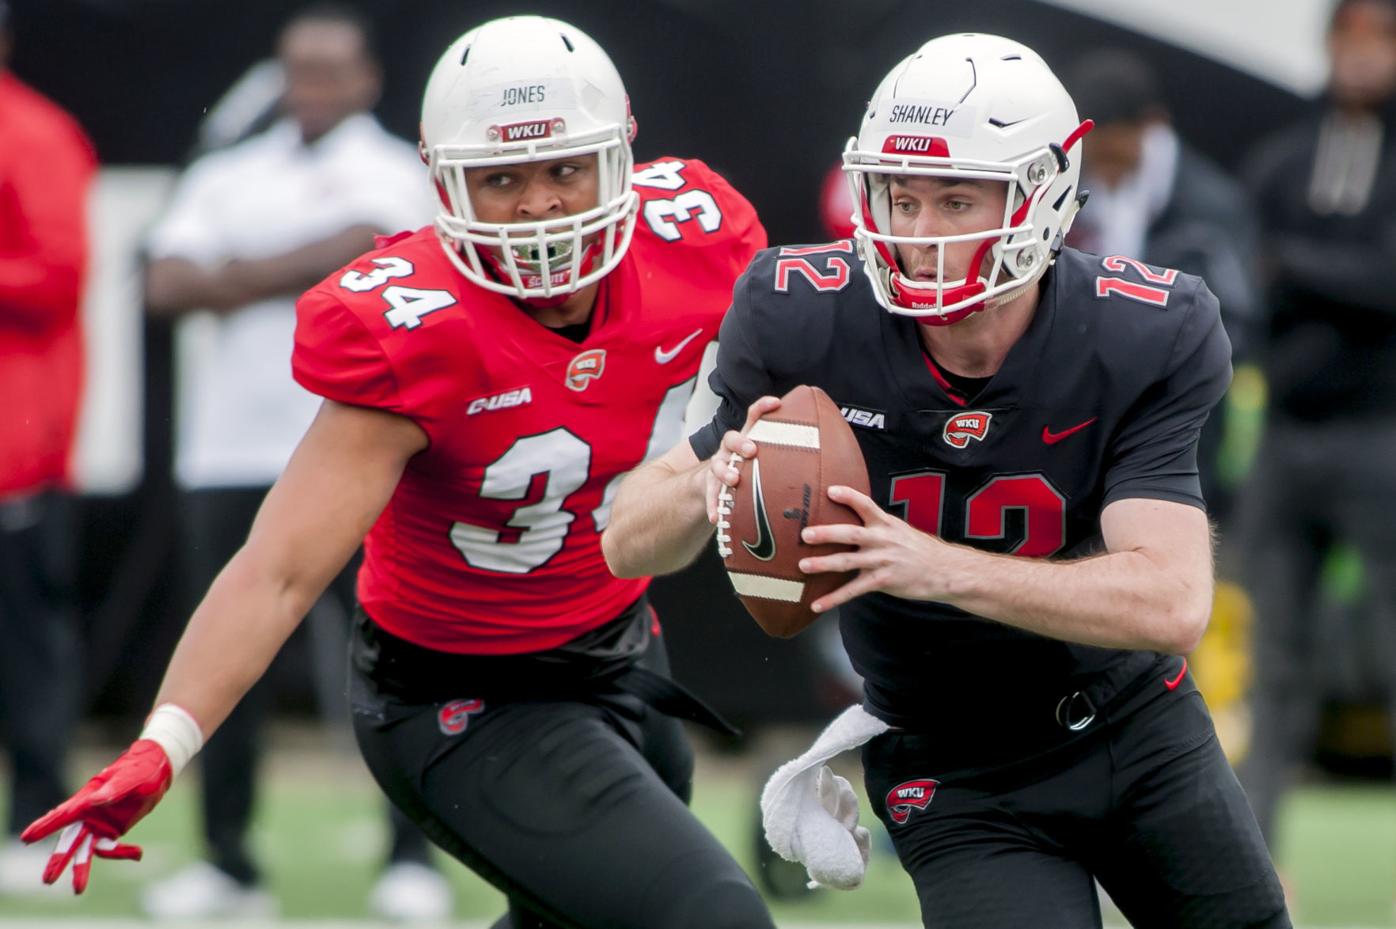 Downfield throws, defense's takeaways highlight Hilltopper spring game